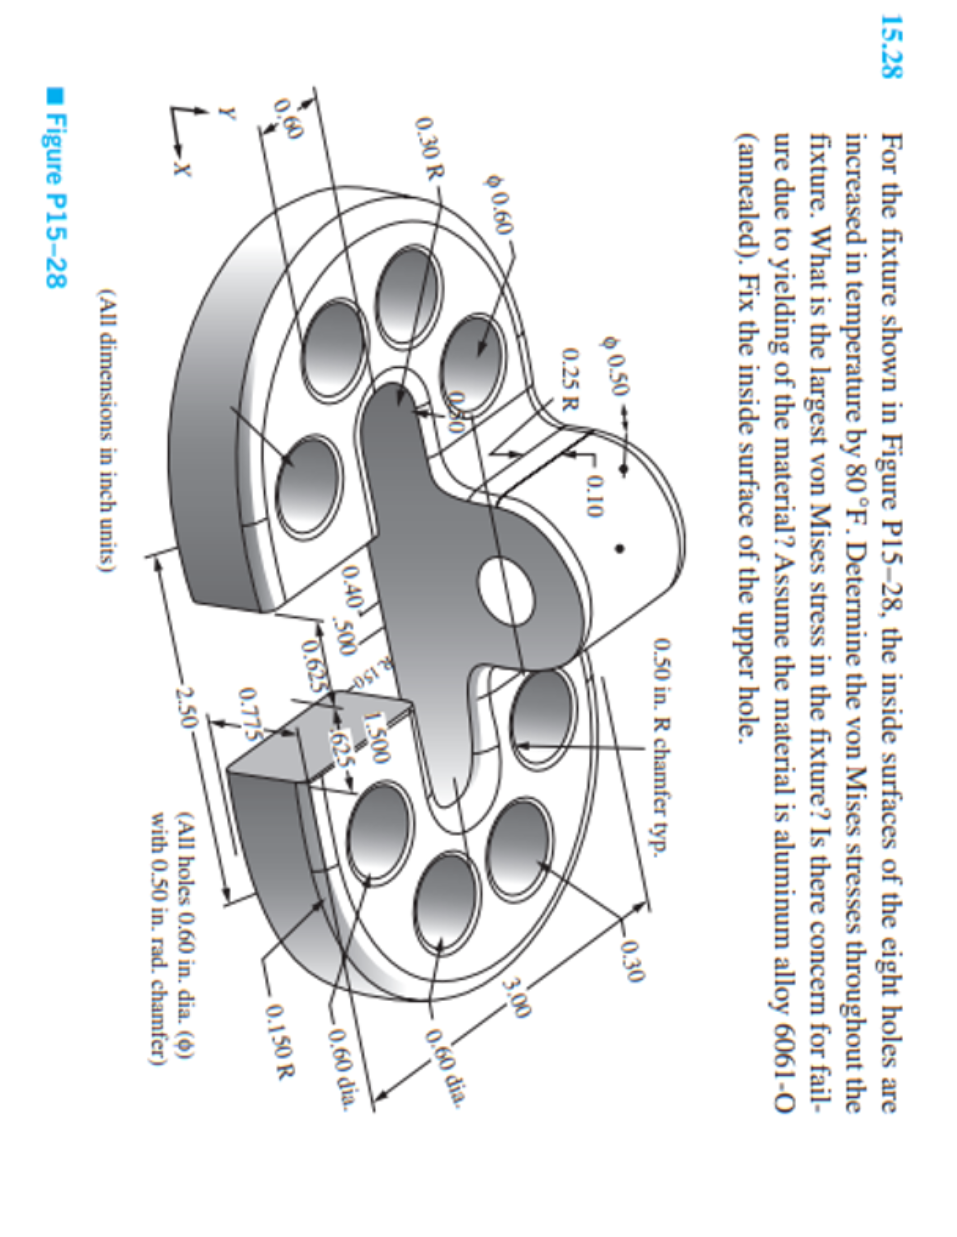 15.28
For the fixture shown in Figure P15-28, the inside surfaces of the eight holes are
increased in temperature by 80 °F. Determine the von Mises stresses throughout the
fixture. What is the largest von Mises stress in the fixture? Is there concern for fail-
ure due to yielding of the material? Assume the material is aluminum alloy 6061-0
(annealed). Fix the inside surface of the upper hole.
60.60
0.30 R
0,60
Y
tax
Lx
$0.50
Figure P15-28
0.25 R
மத்
0.10
0.40
(All dimensions in inch units)
0.50 in. R chamfer typ.
500
R 150
0.625
1.500
625-
0.775
-2.50
-0.30
3.00
0.60 dia.
-0.60 dia.
-0.150 R
(All holes 0.60 in. dia. (6)
with 0.50 in. rad. chamfer)